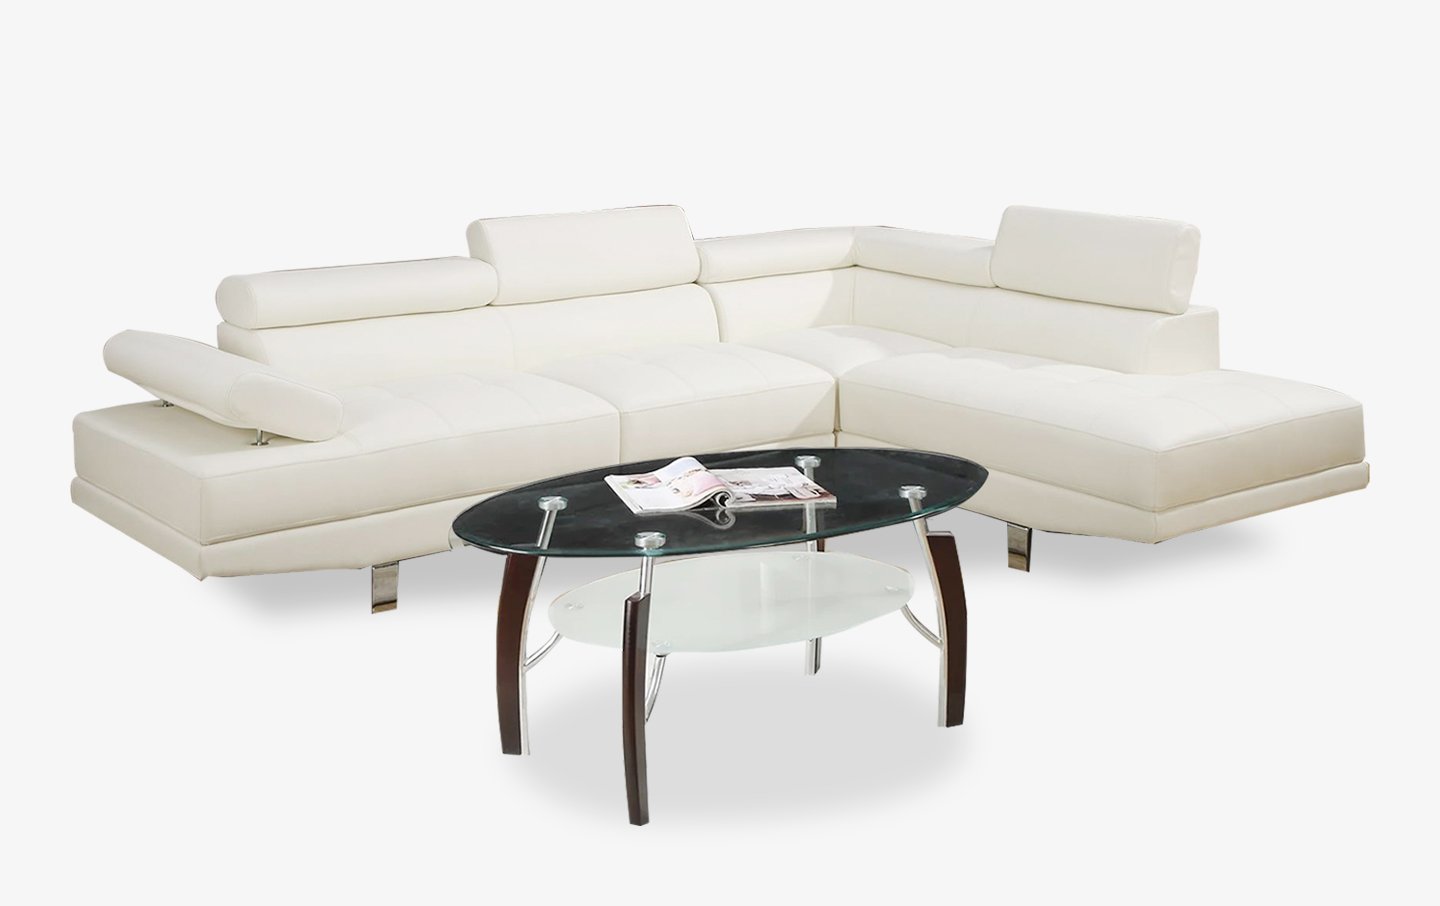 Armadale White Sectional